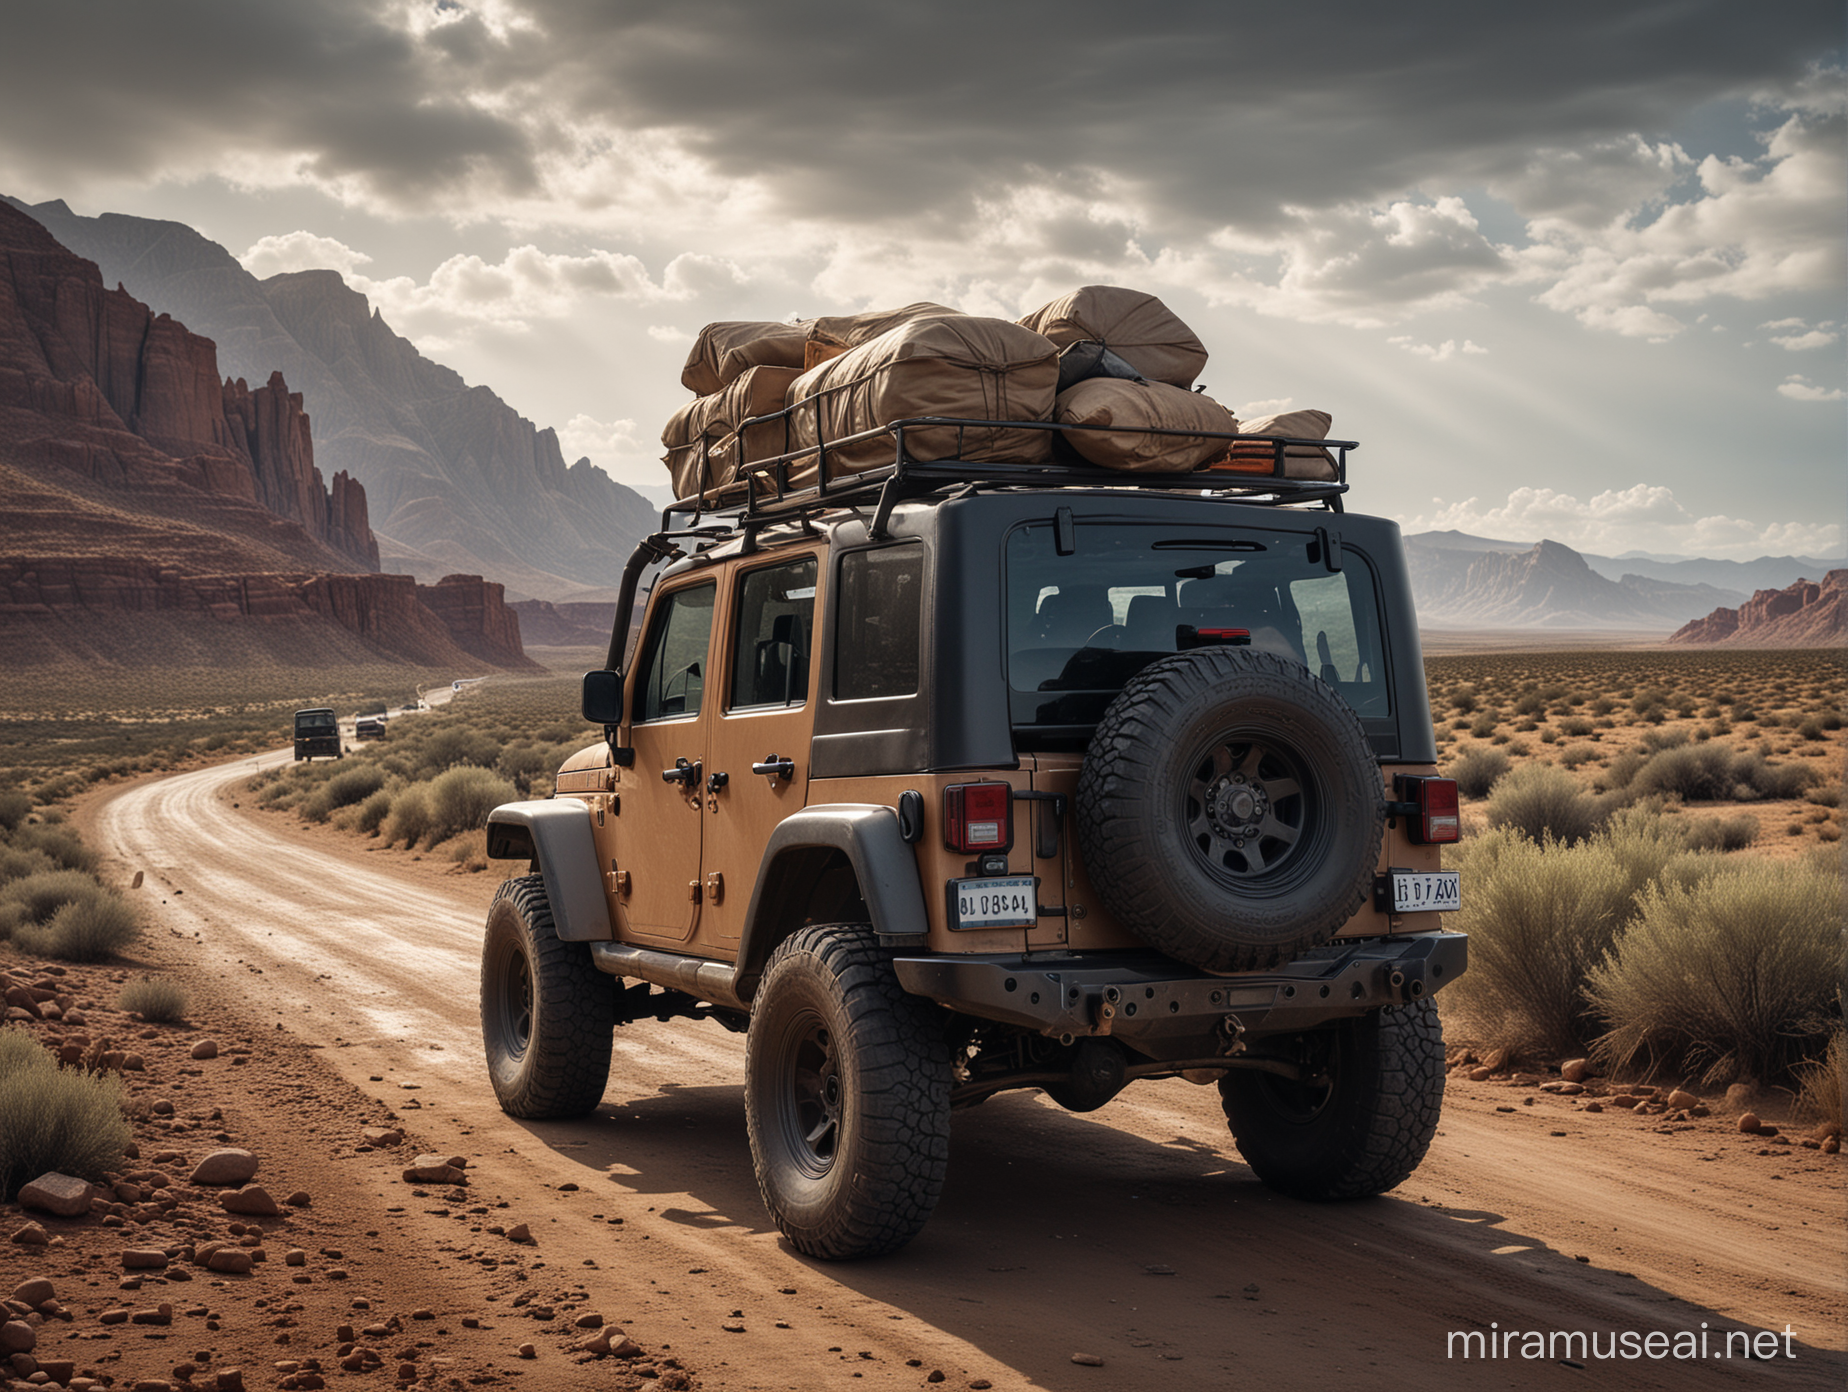 long shoot, realistic image of a Jeep Rubicon heading back home from a journey, as seen from the rear, with stacked belongings atop the vehicle. The scene should be set on a highway, with the typical vista of a toll road stretching into the distance. Capture the essence of a journey concluding, with the Jeep carrying memories of adventures embarked upon, lightroom effects, hyperrealistic, real faces. Ultra HDR resolution, true and strong colors.